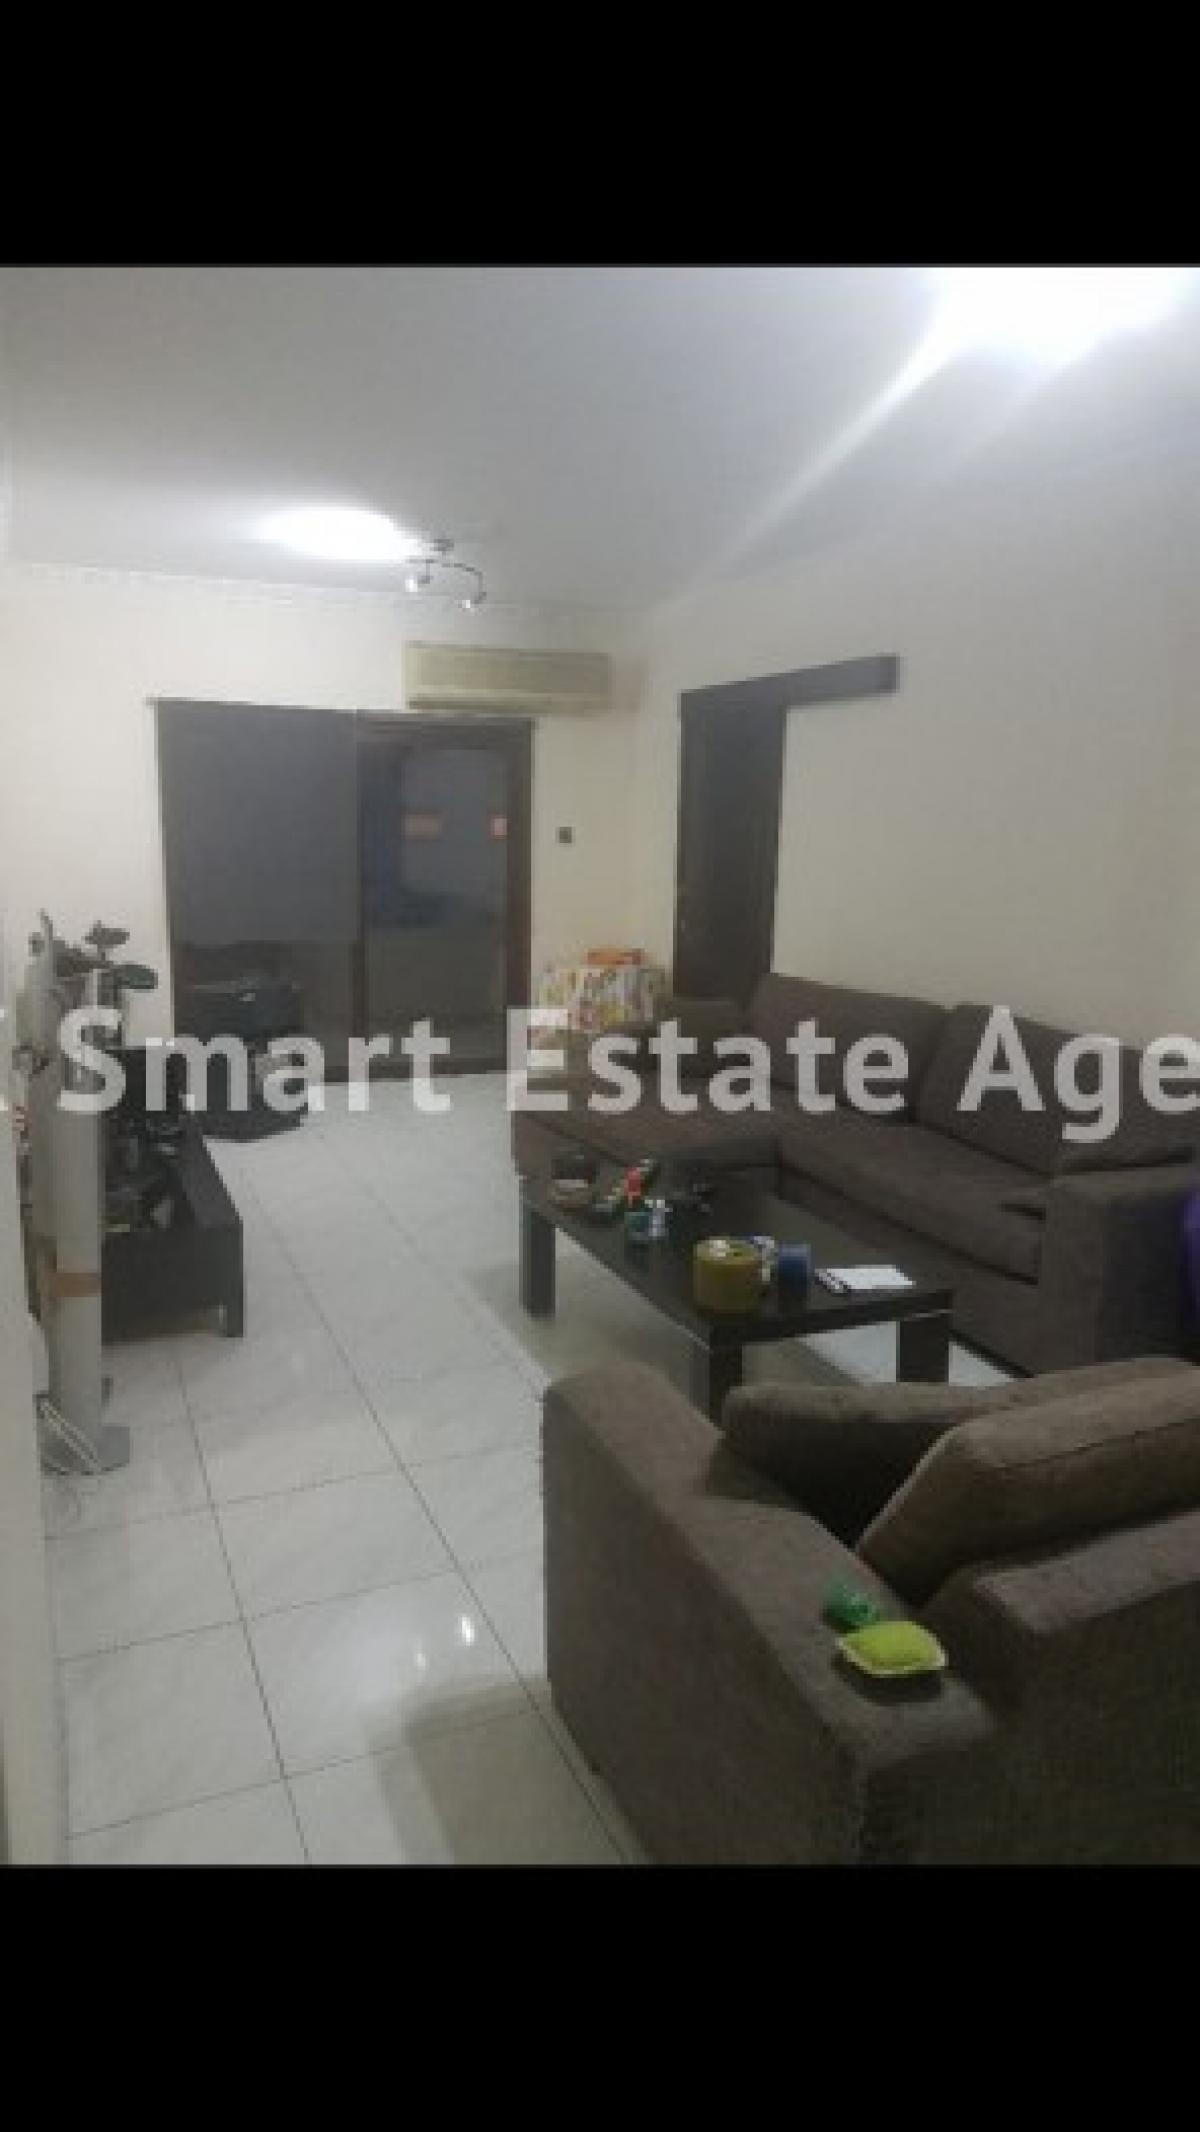 Picture of Apartment For Sale in Katholiki, Limassol, Cyprus